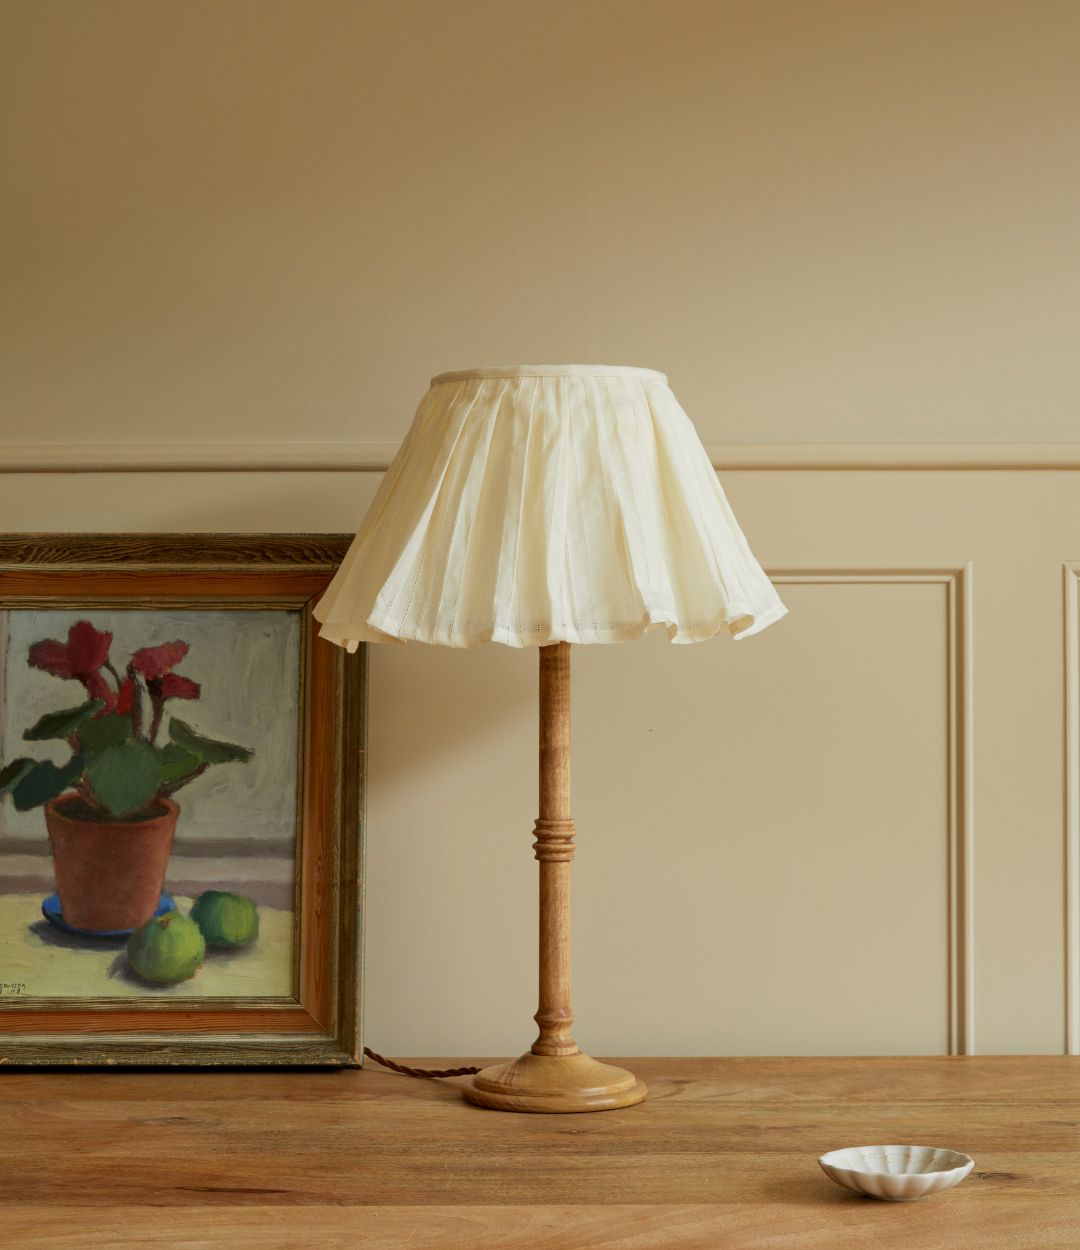 Loose Pleat Cream Embroidered Stripe Lampshade